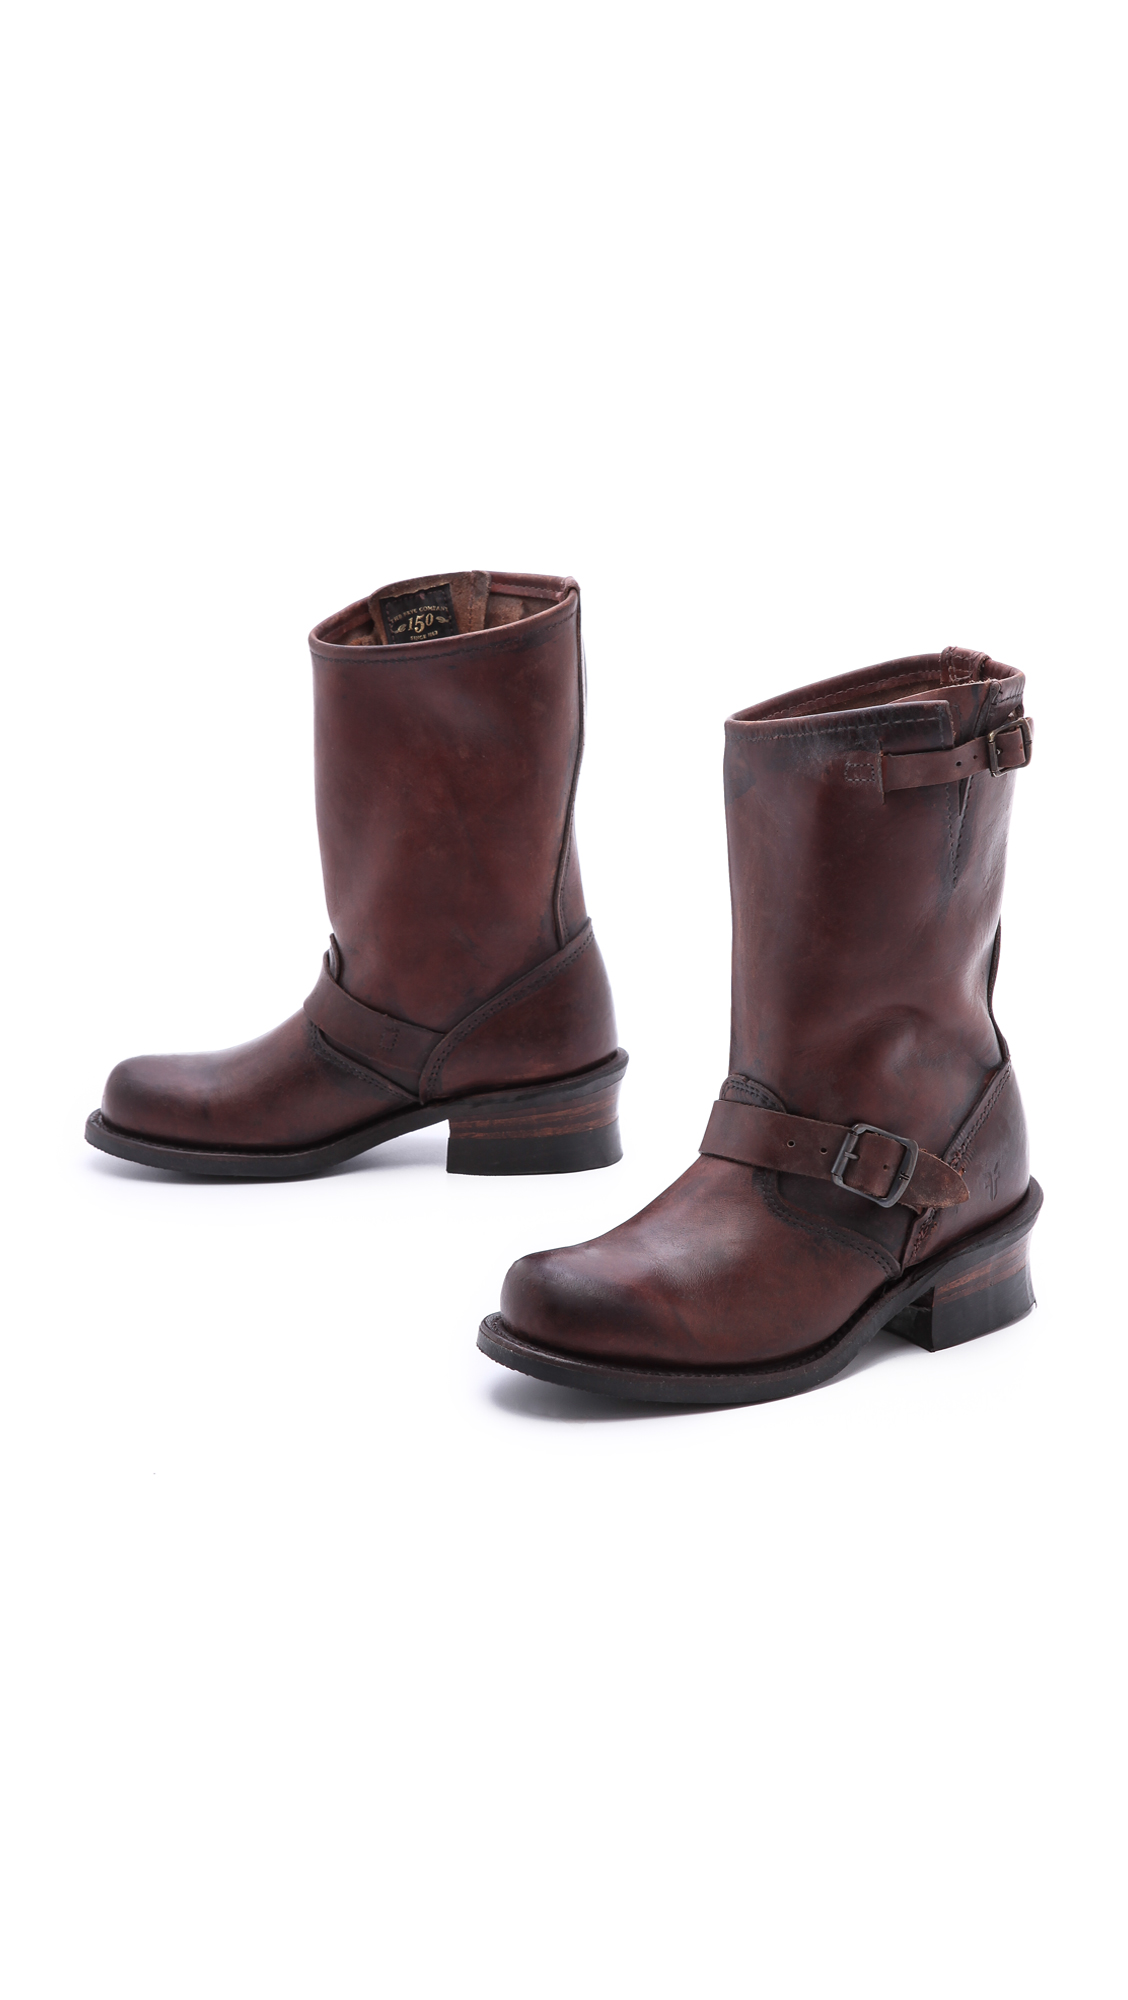 Frye 150th Anniversary Engineer 12r Boots in Brown | Lyst